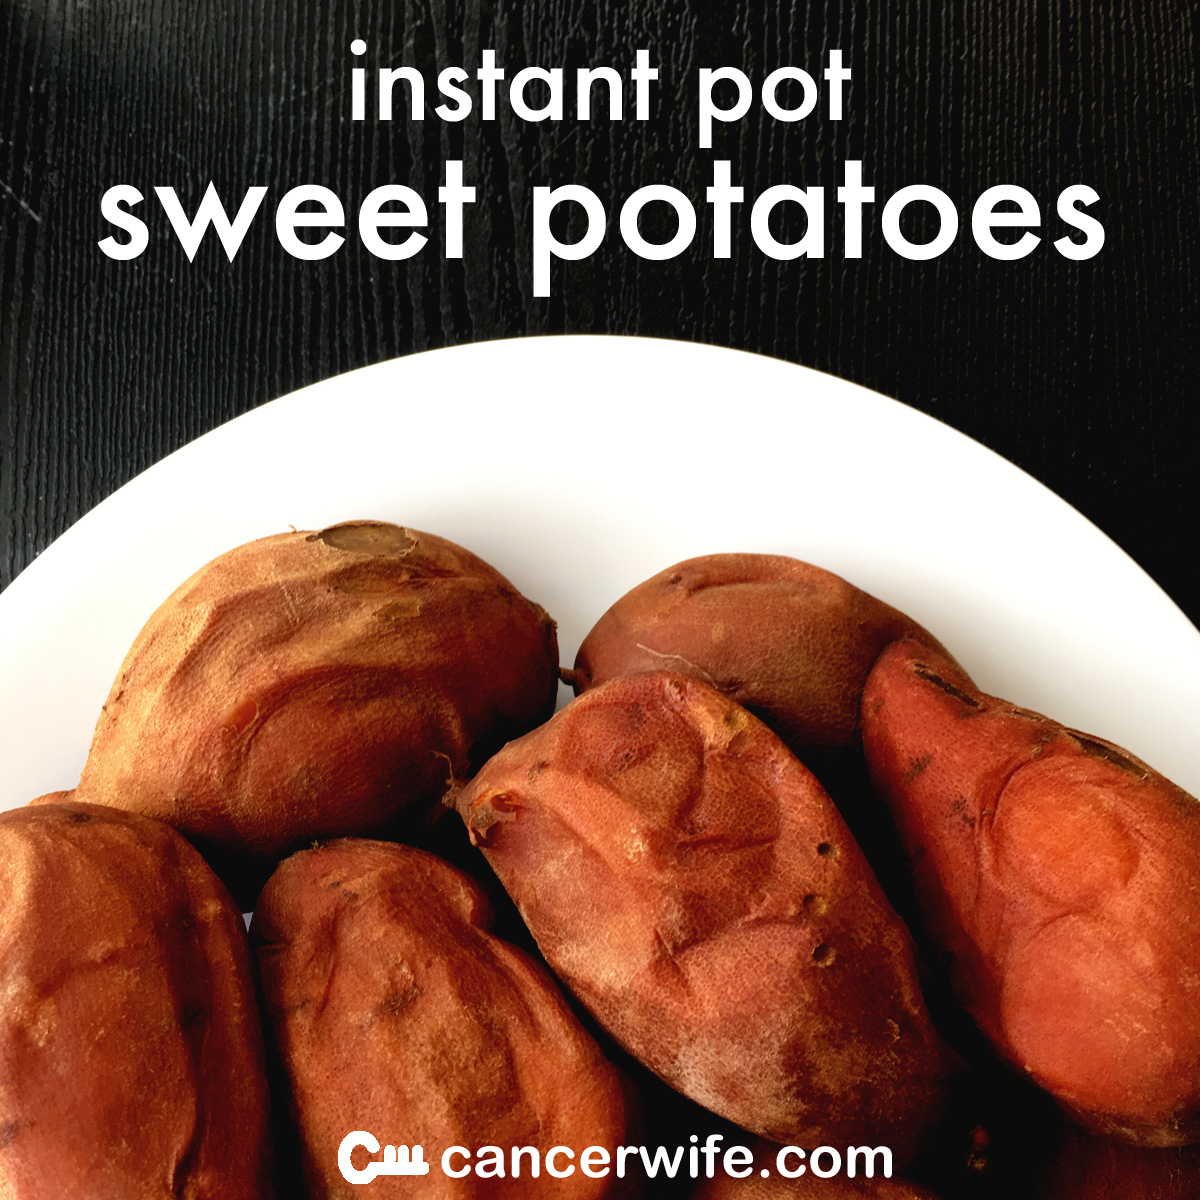 Instant Pot steamed sweet potatoes recipe, healthy and easy recipe